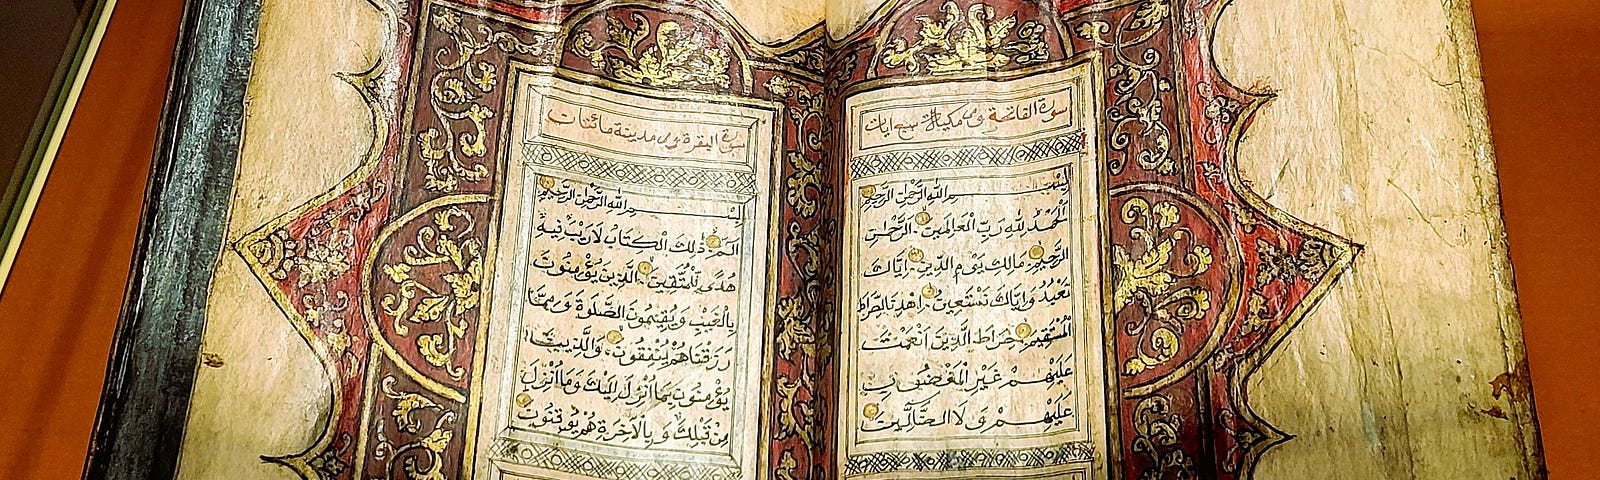 Pages of an ancient book in the Islamic Arts Museum, Kuala Lumpur, Malaysia